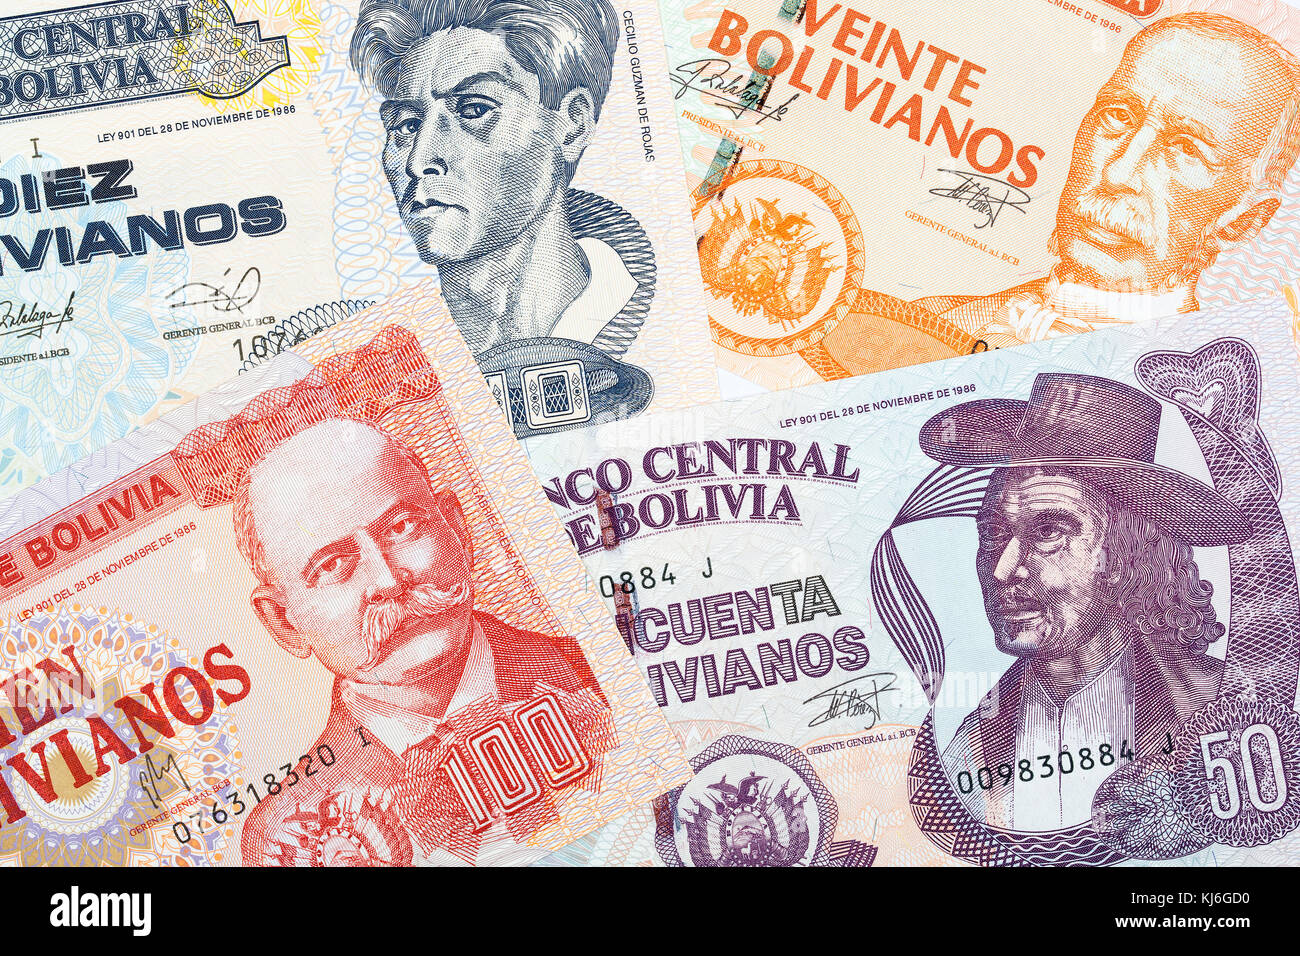 Bolivian Currency High Resolution Stock Photography and Images - Alamy